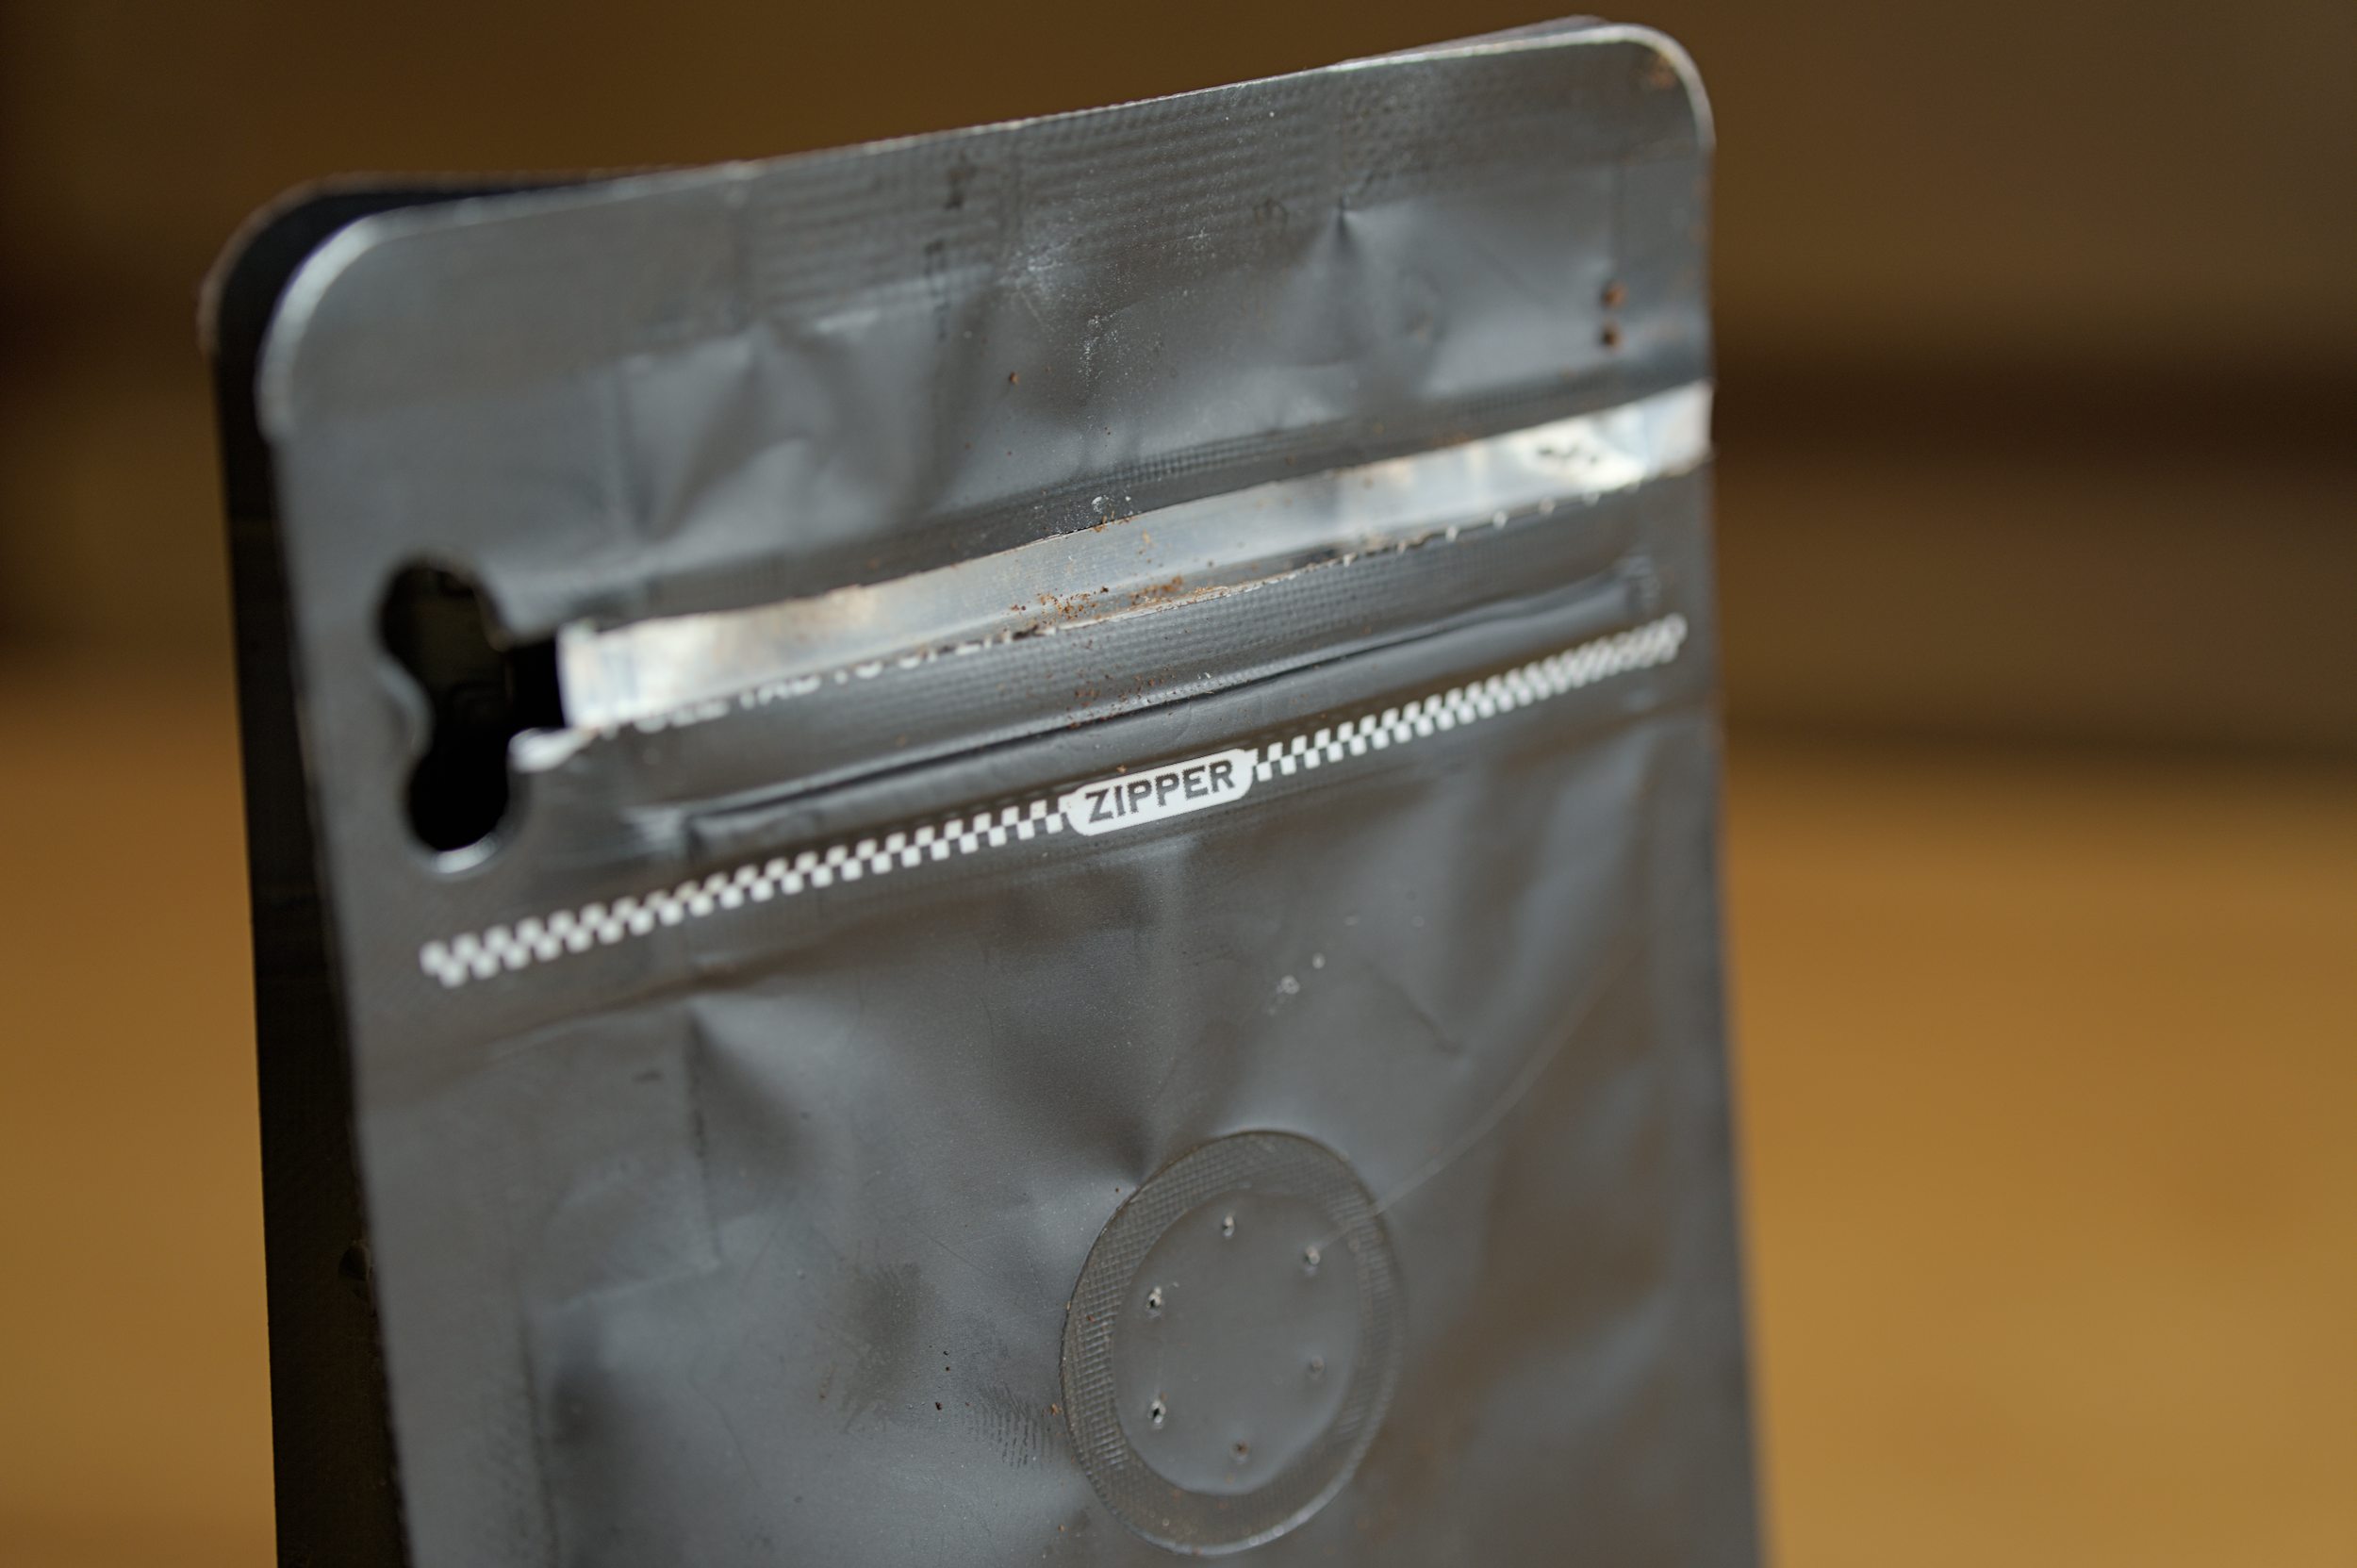 Zip mechanism at the back of the bag